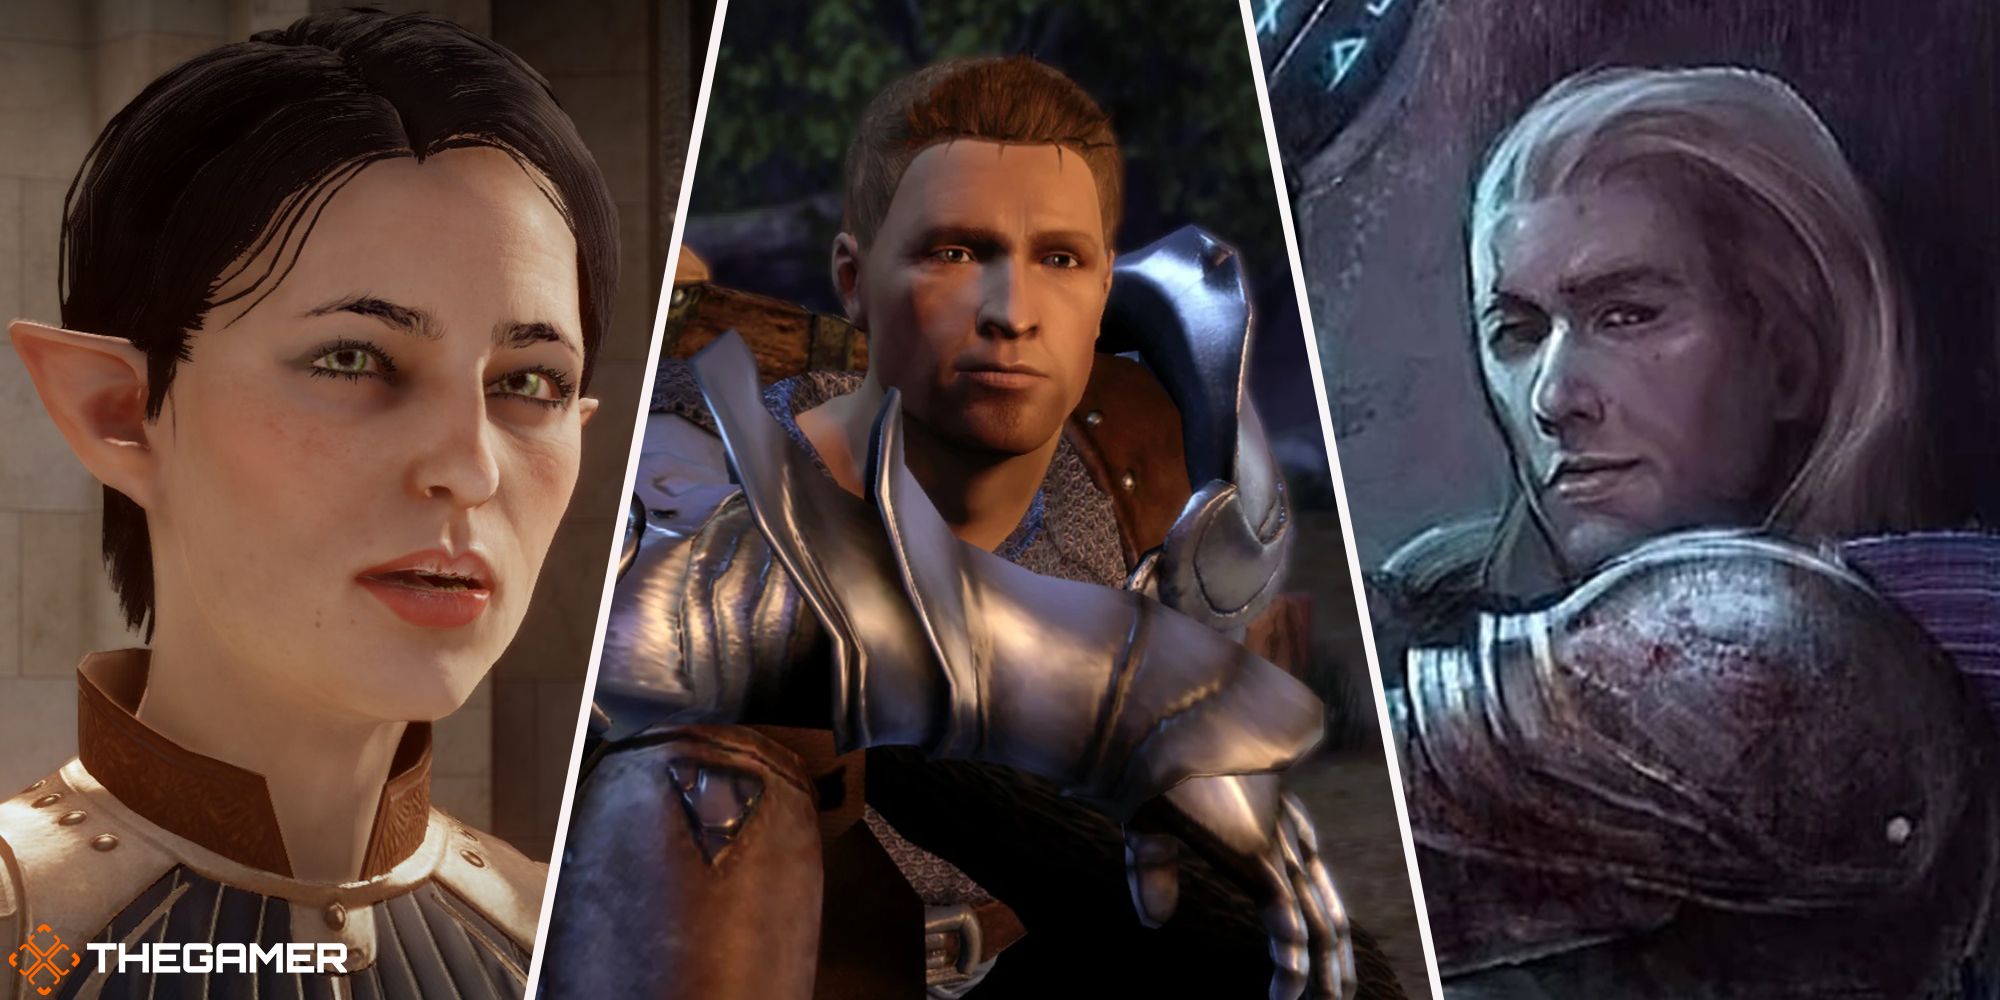 Dragon Age - Fiona, Alistair, King Maric (left to right)